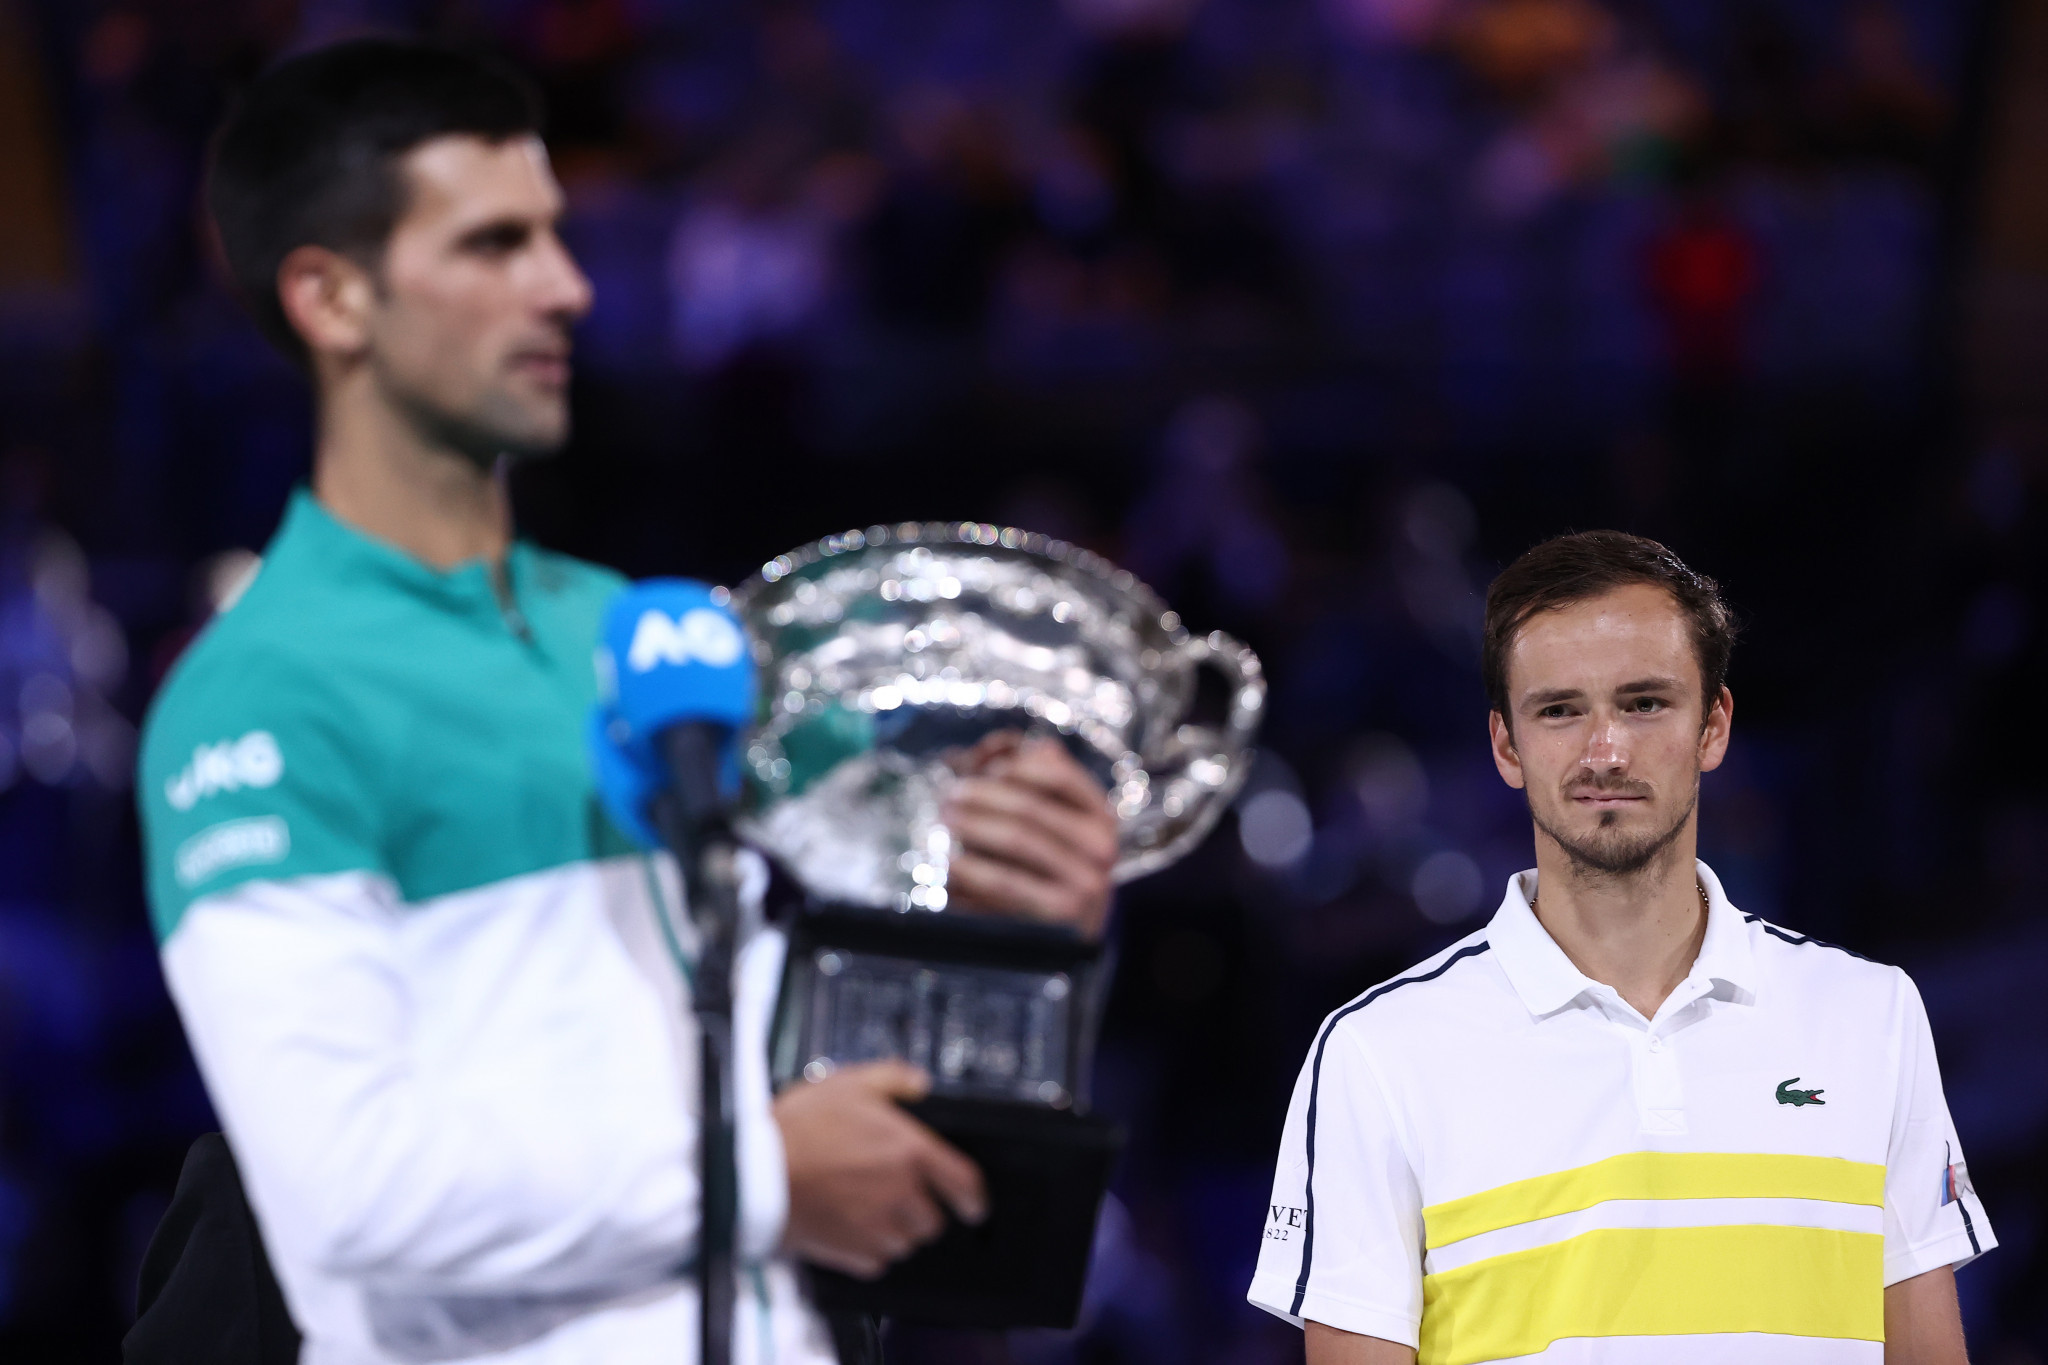 Medvedev watches on as Djokovic gives his victory speech with the trophy in his arms ©Getty Images